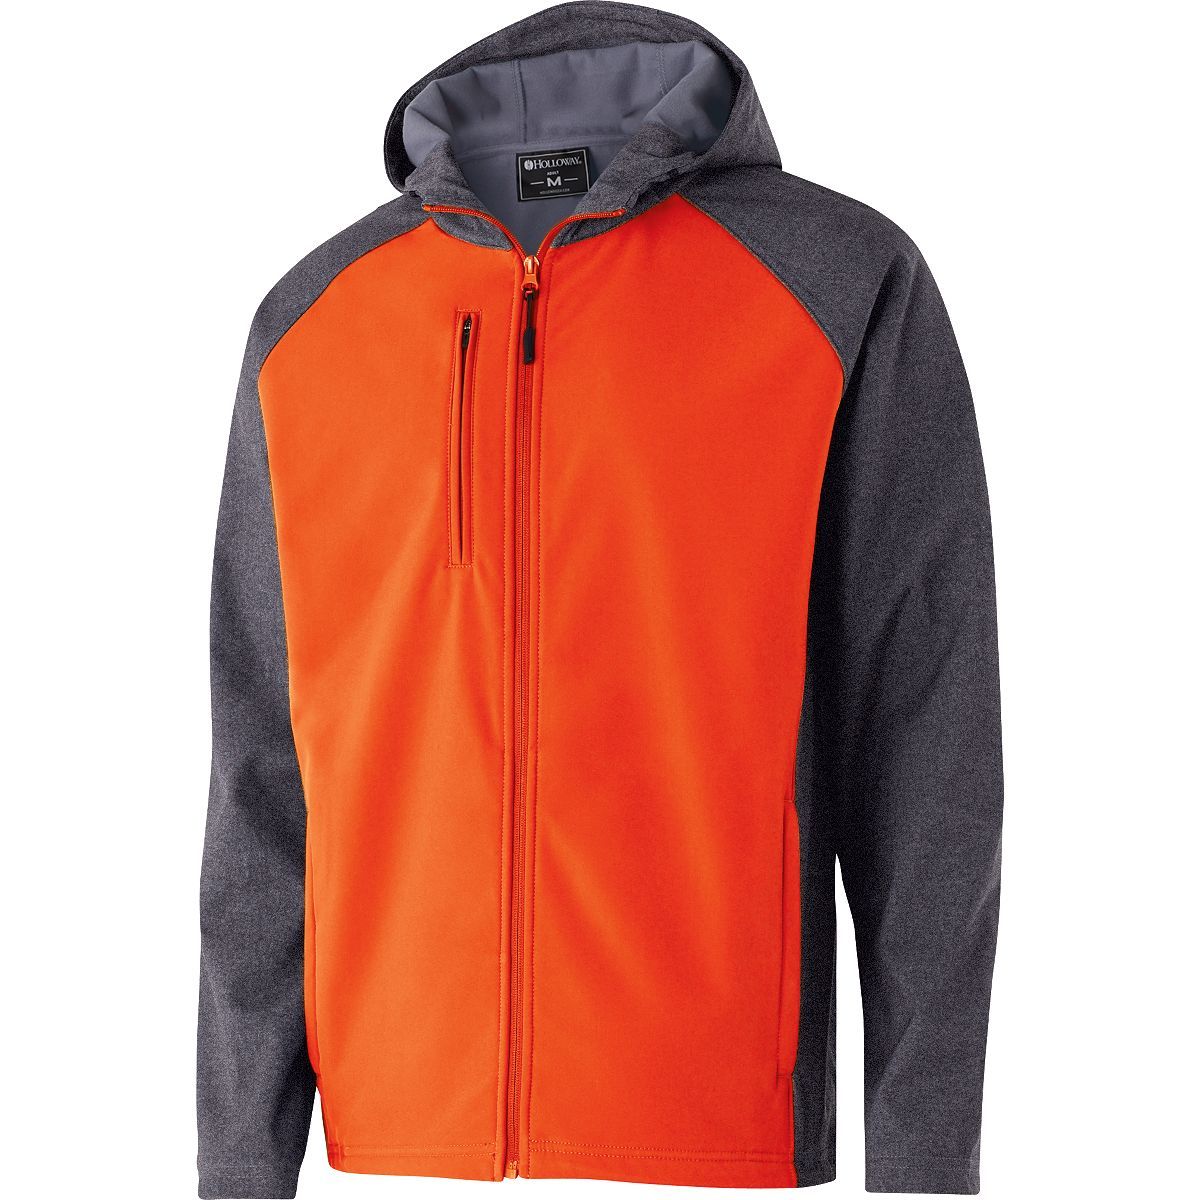 Holloway Raider Softshell Jacket in Carbon Print/Orange  -Part of the Adult, Adult-Jacket, Holloway, Outerwear product lines at KanaleyCreations.com